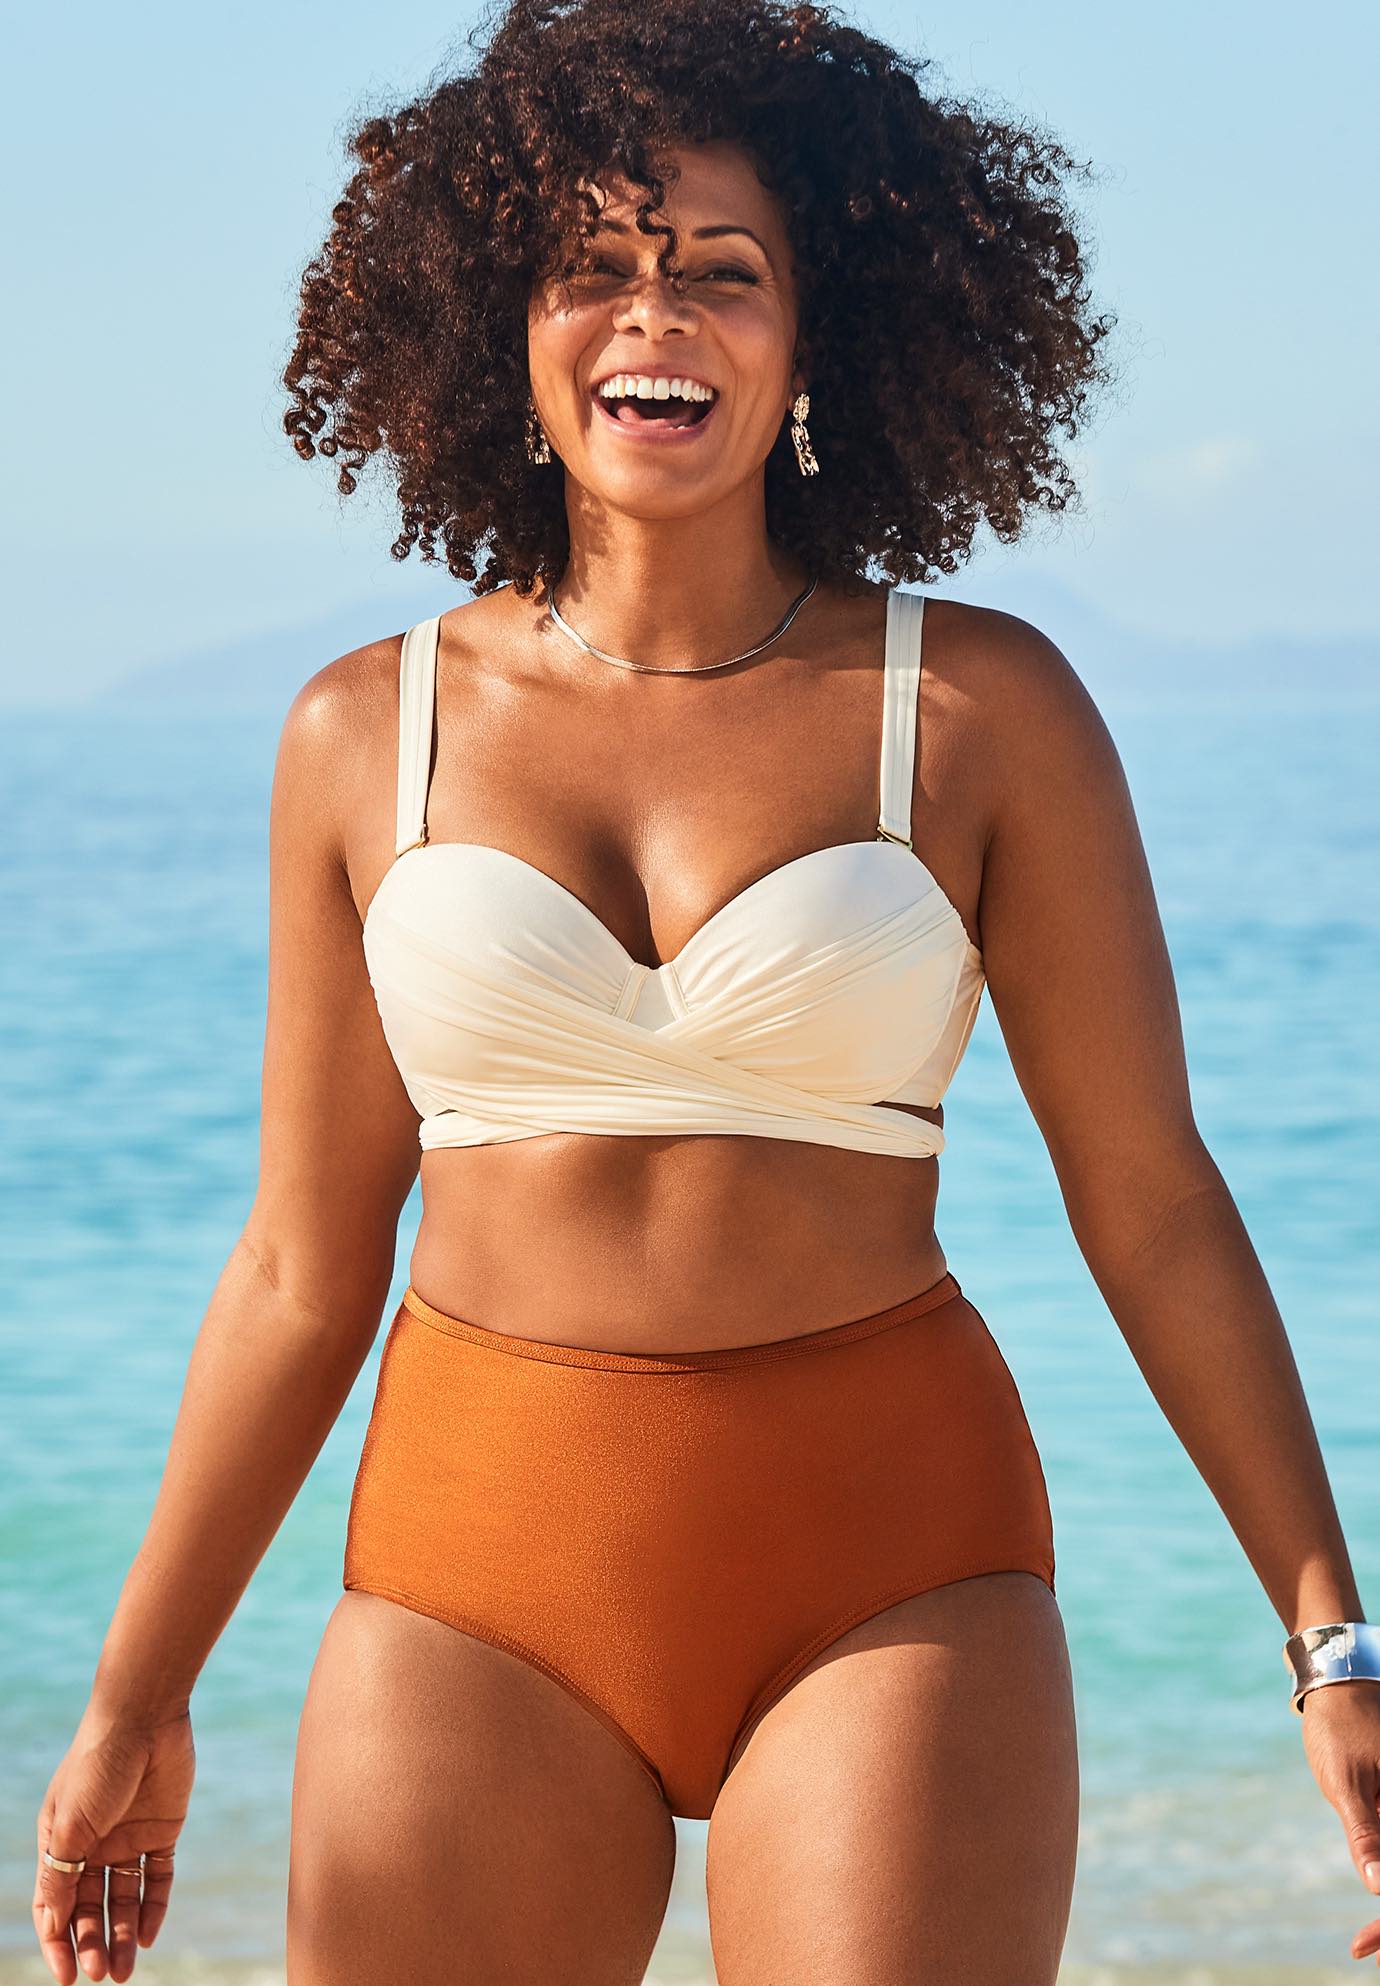 The Best Two Piece Swimsuits For Your Body Type